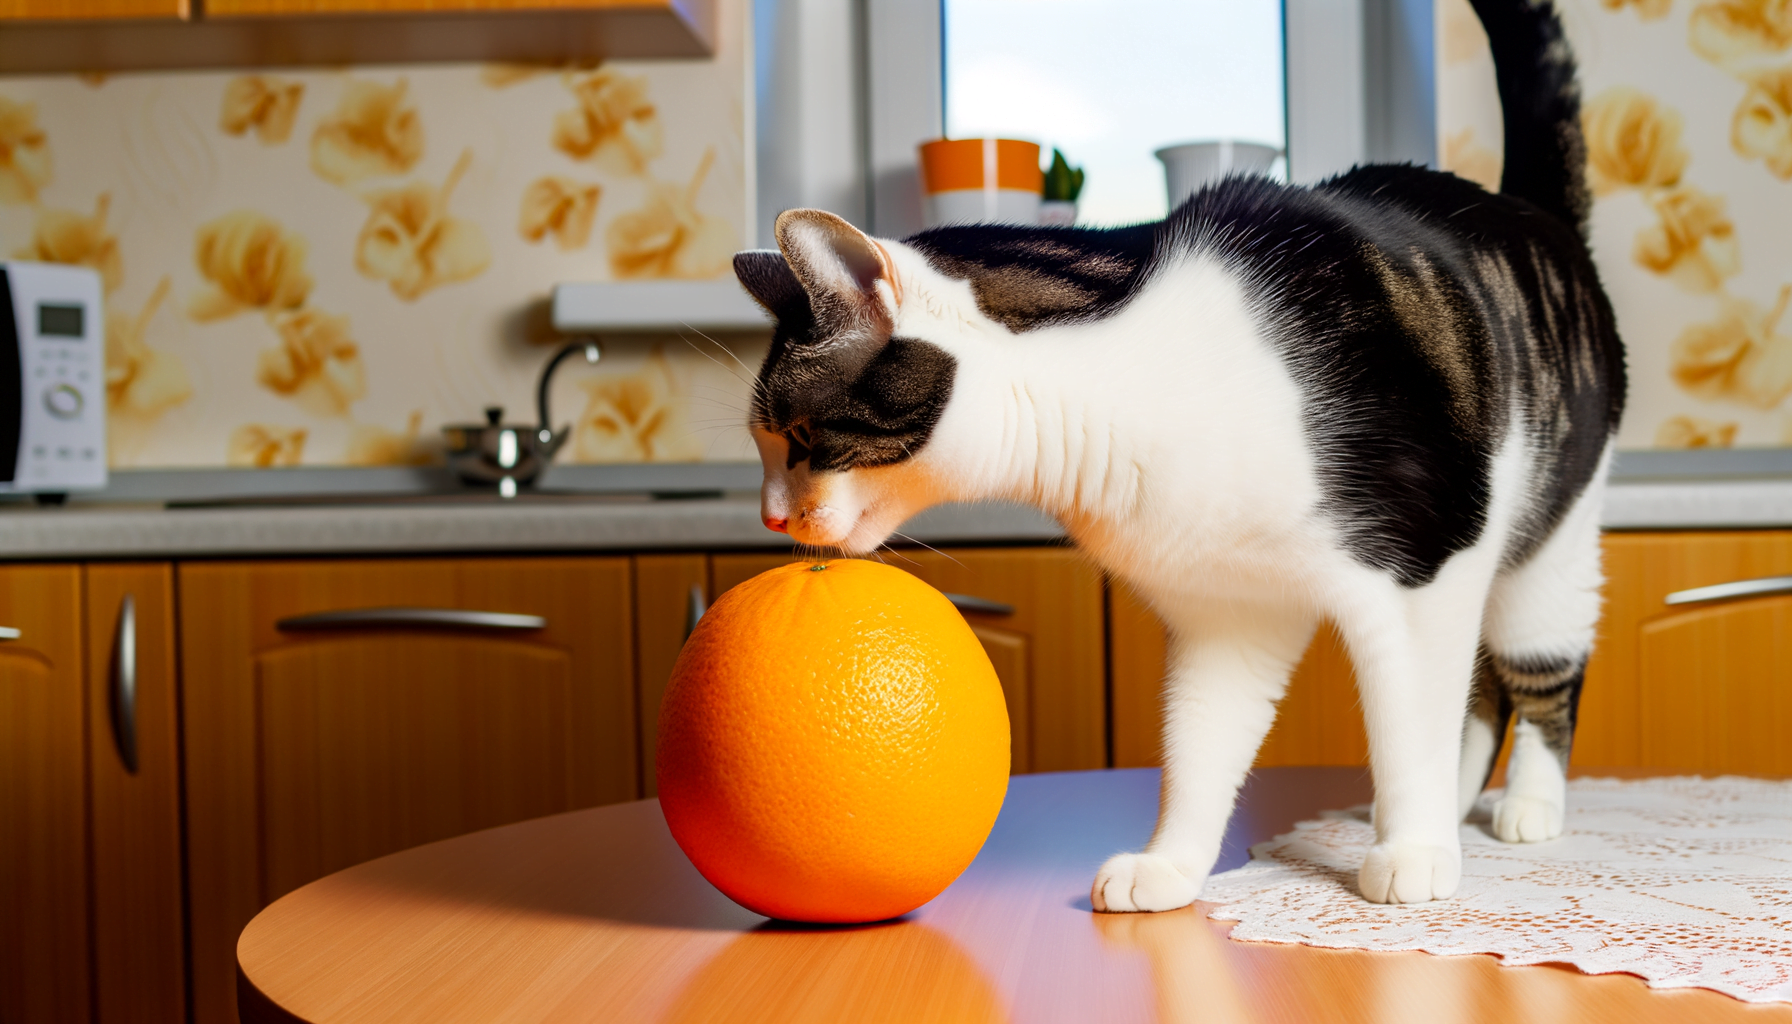 "Unraveling the Citrus Mystery: Can Cats Safely Consume Oranges?"